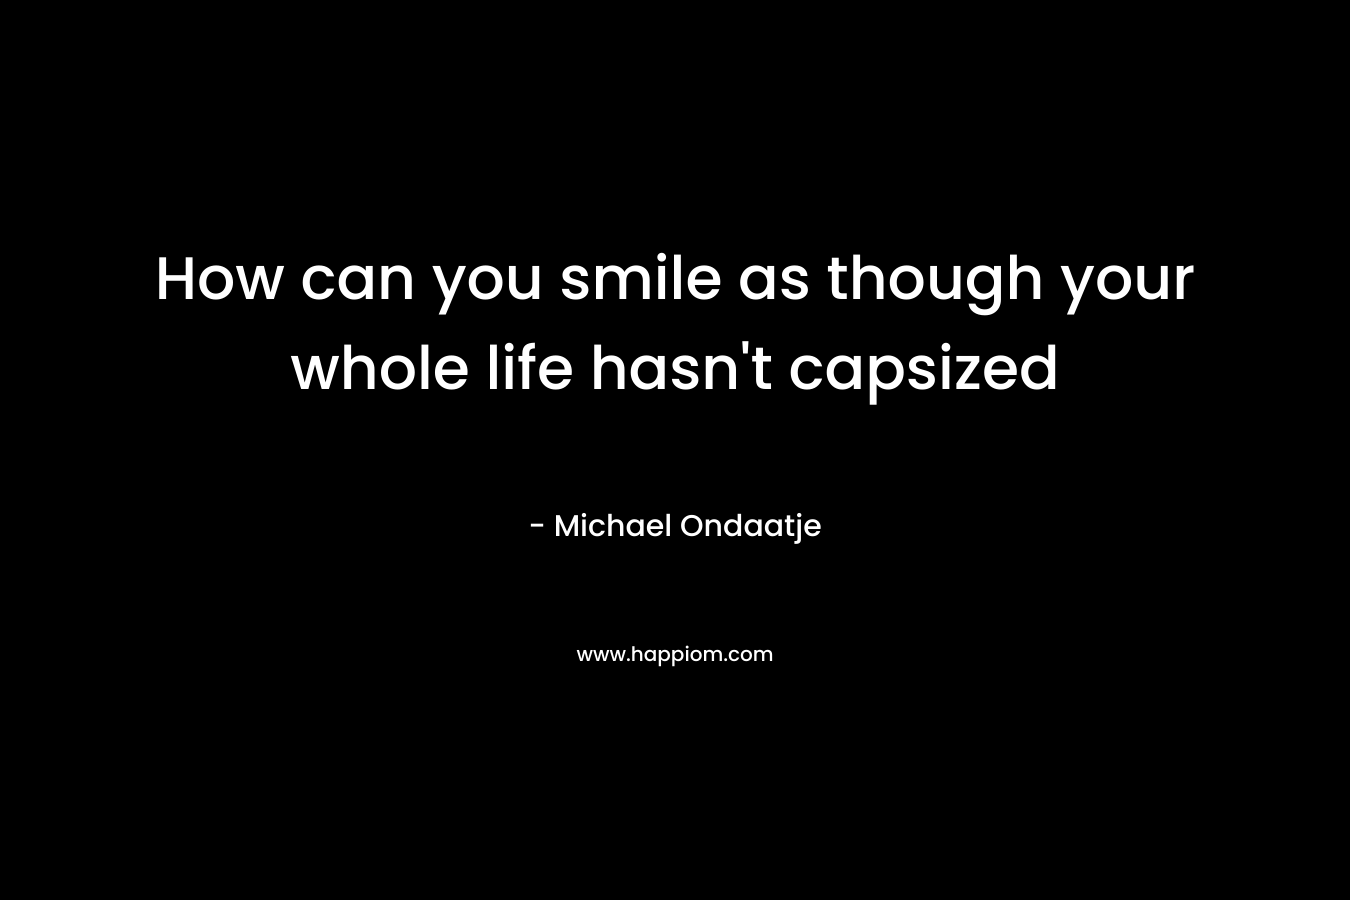 How can you smile as though your whole life hasn’t capsized – Michael Ondaatje